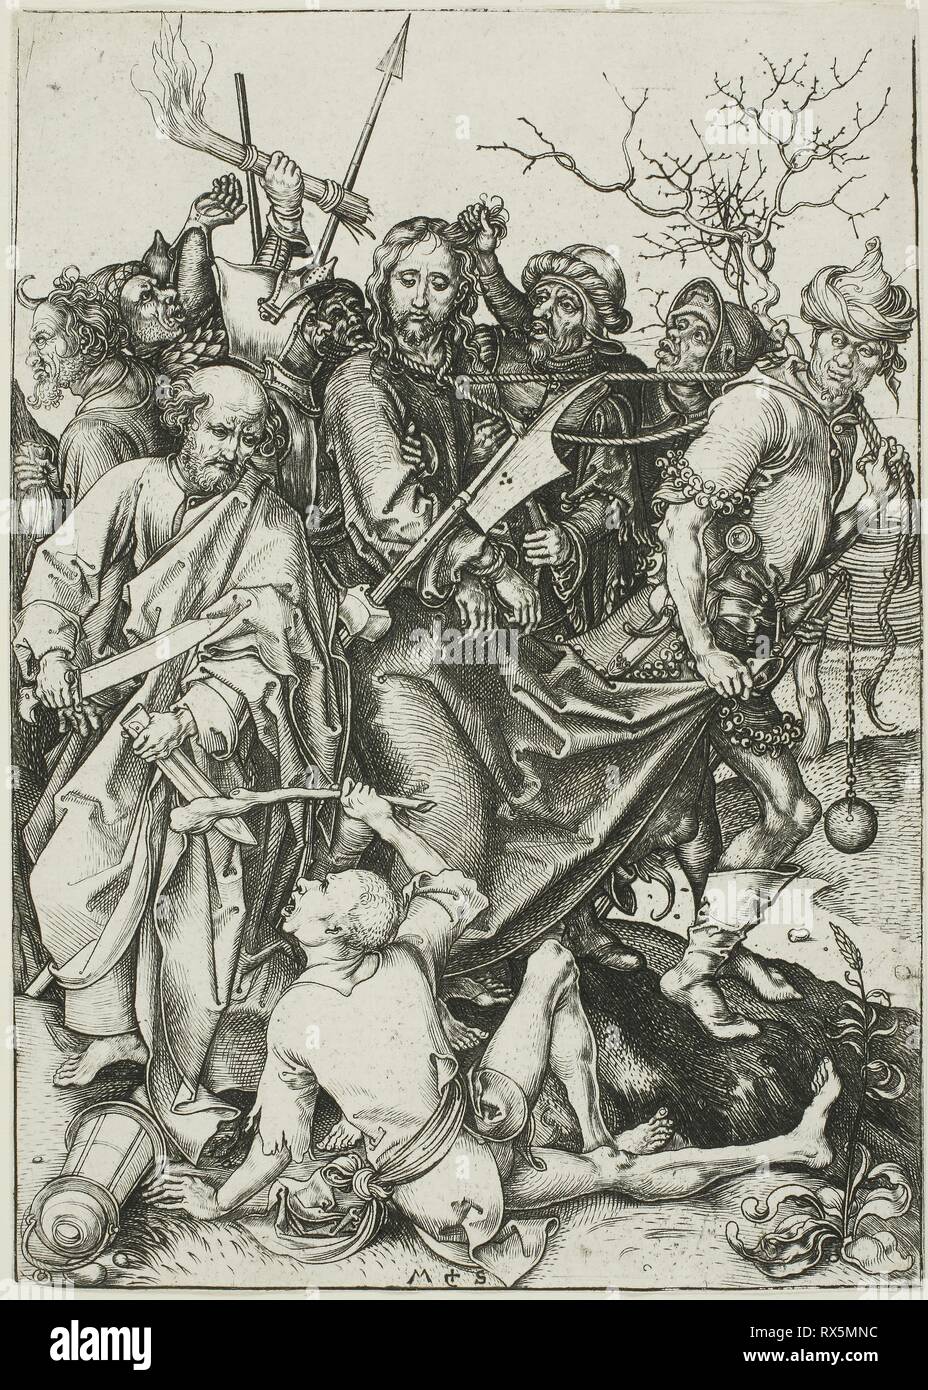 The Betrayal of Christ, from The Passion. Martin Schongauer; German, c. 1450-1491. Date: 1475-1485. Dimensions: 164 x 117 mm (sheet trimmed within plate mark). Engraving on paper. Origin: Germany. Museum: The Chicago Art Institute. Stock Photo